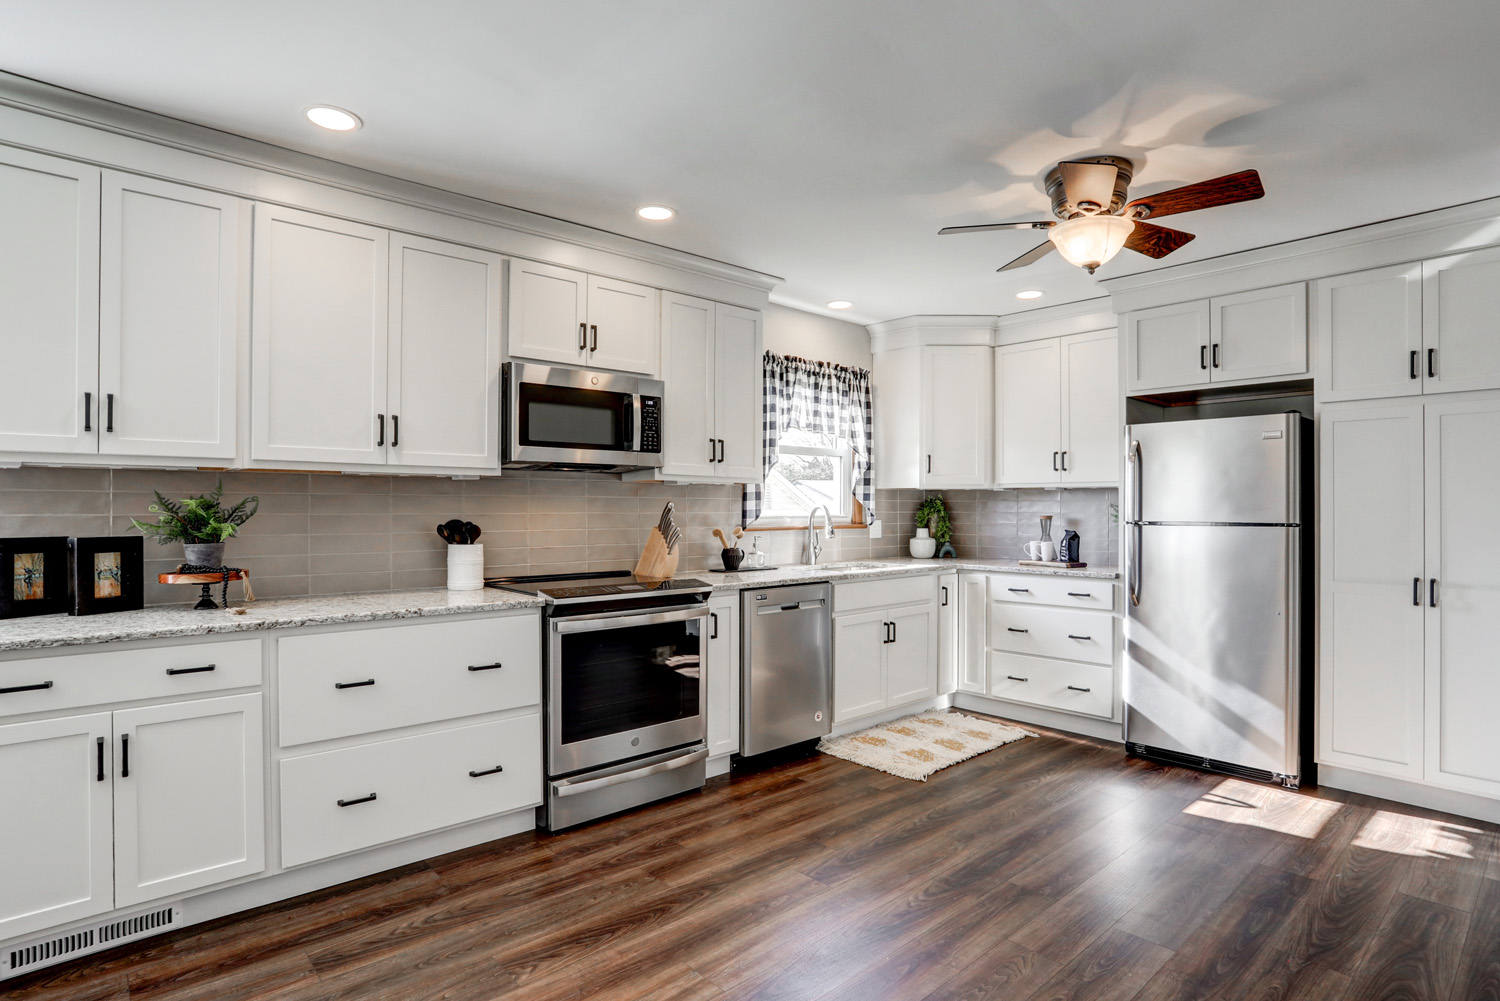 Paradise Kitchen Remodel with White Cabinets and Dark Floors